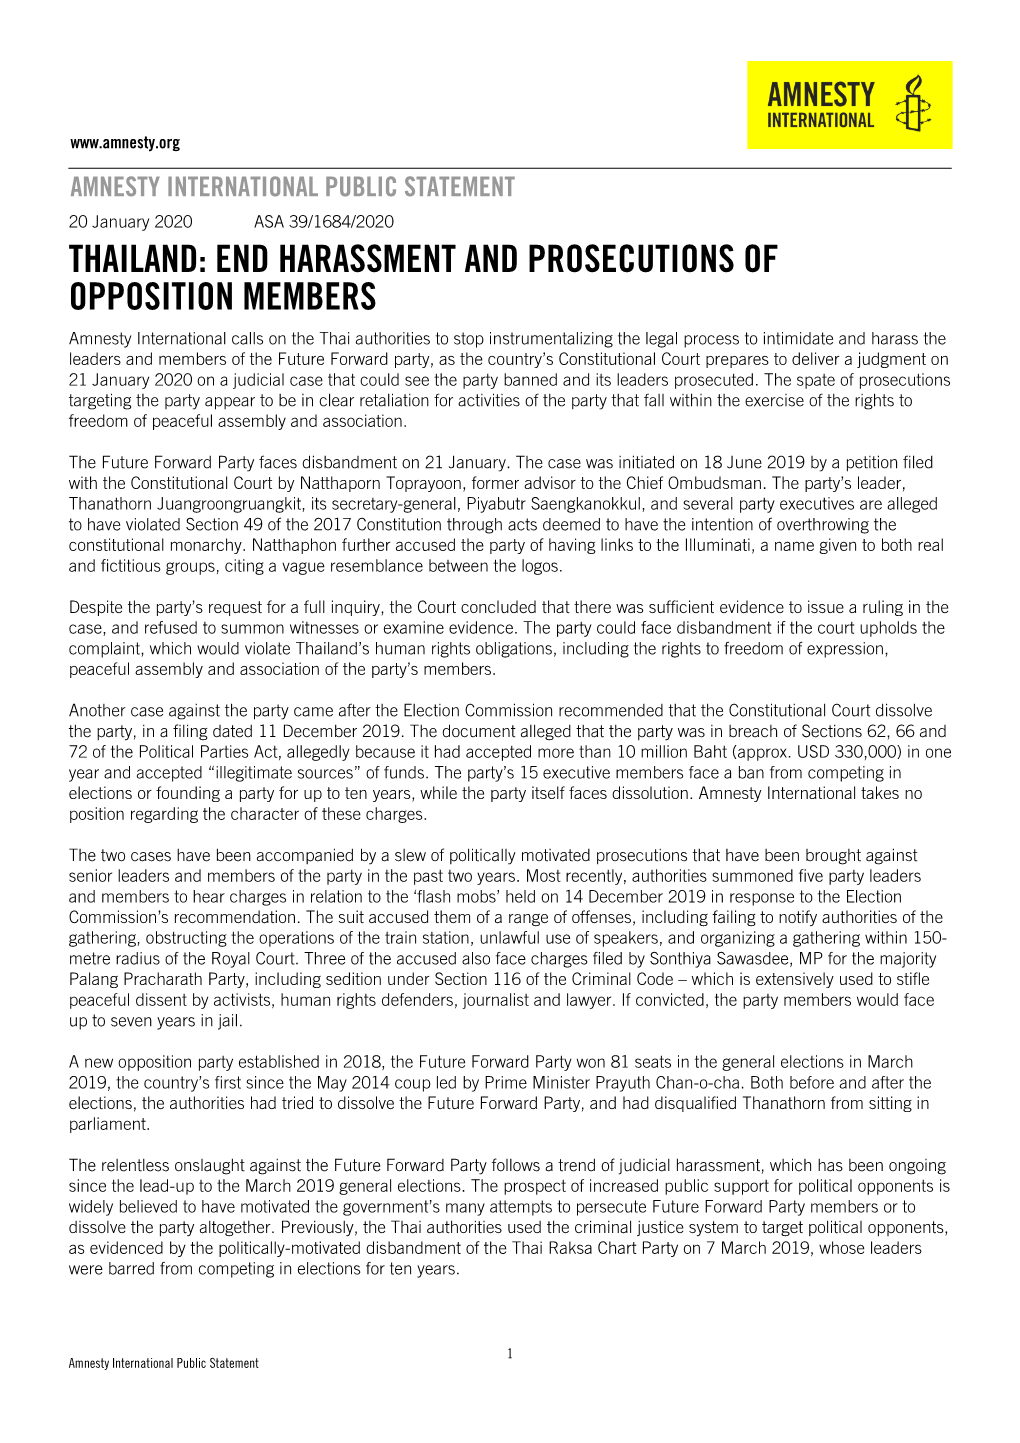 Thailand: End Harassment and Prosecutions of Opposition Members